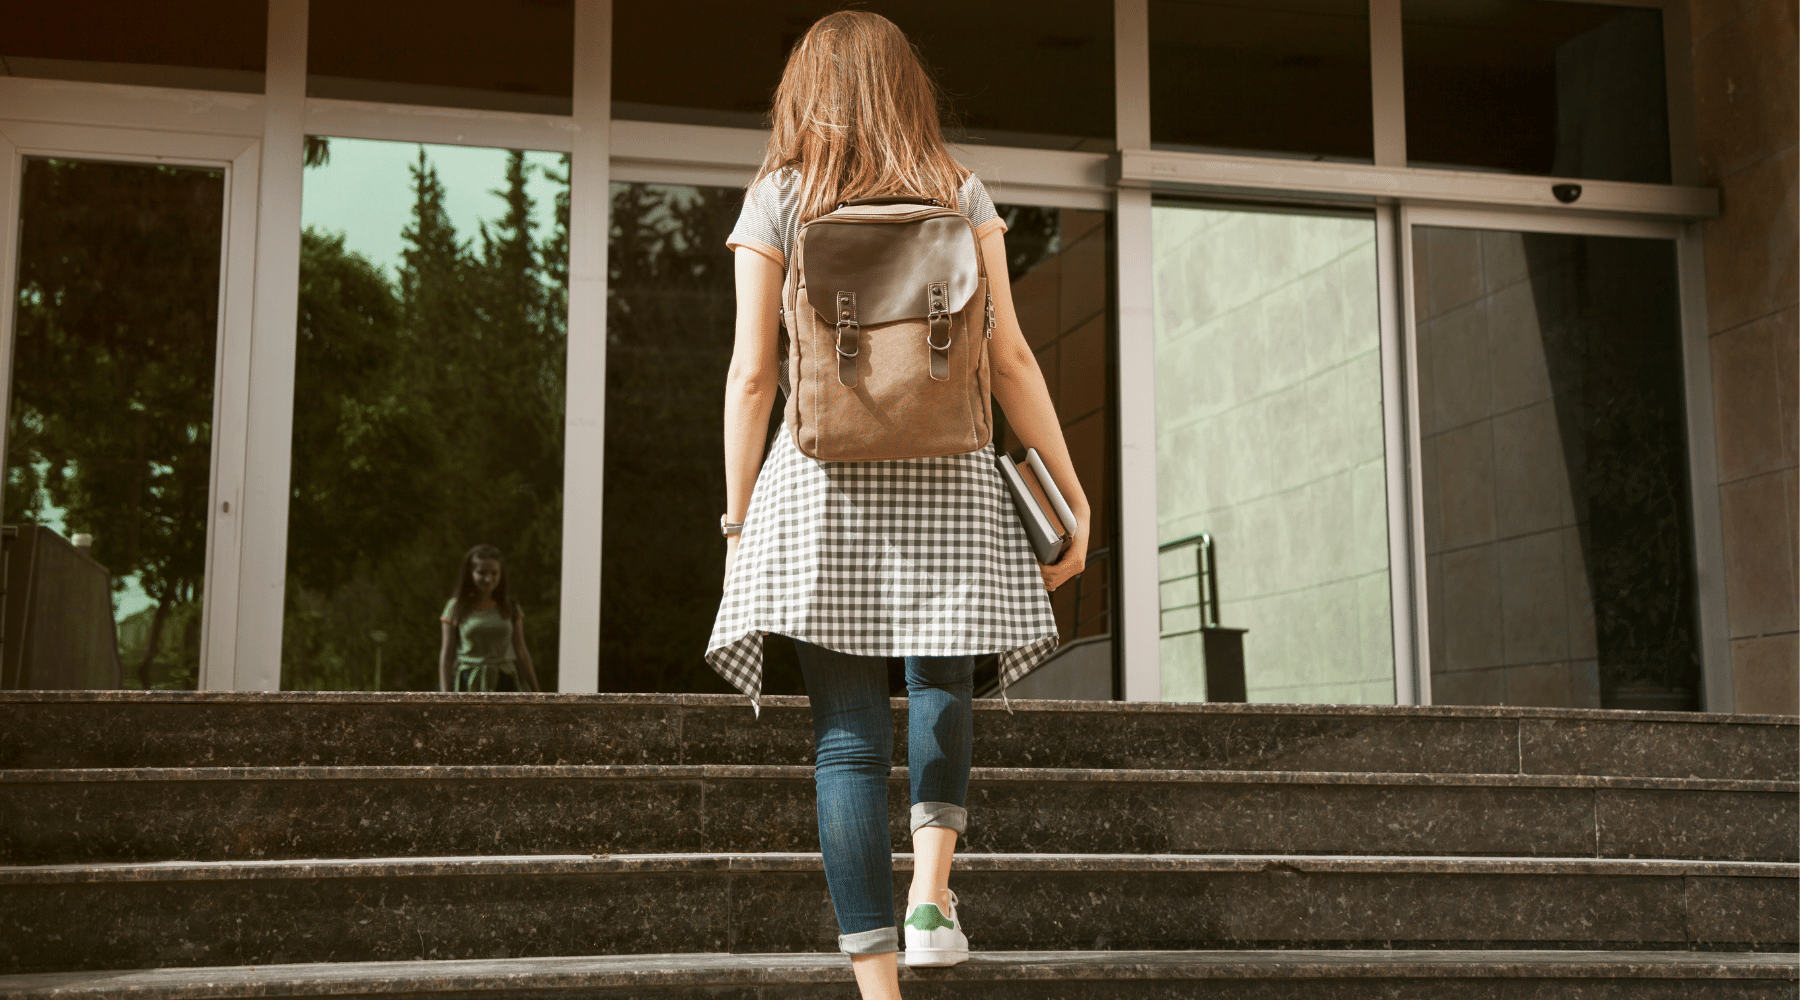 Woman entering the steps of a school with a leather backpack